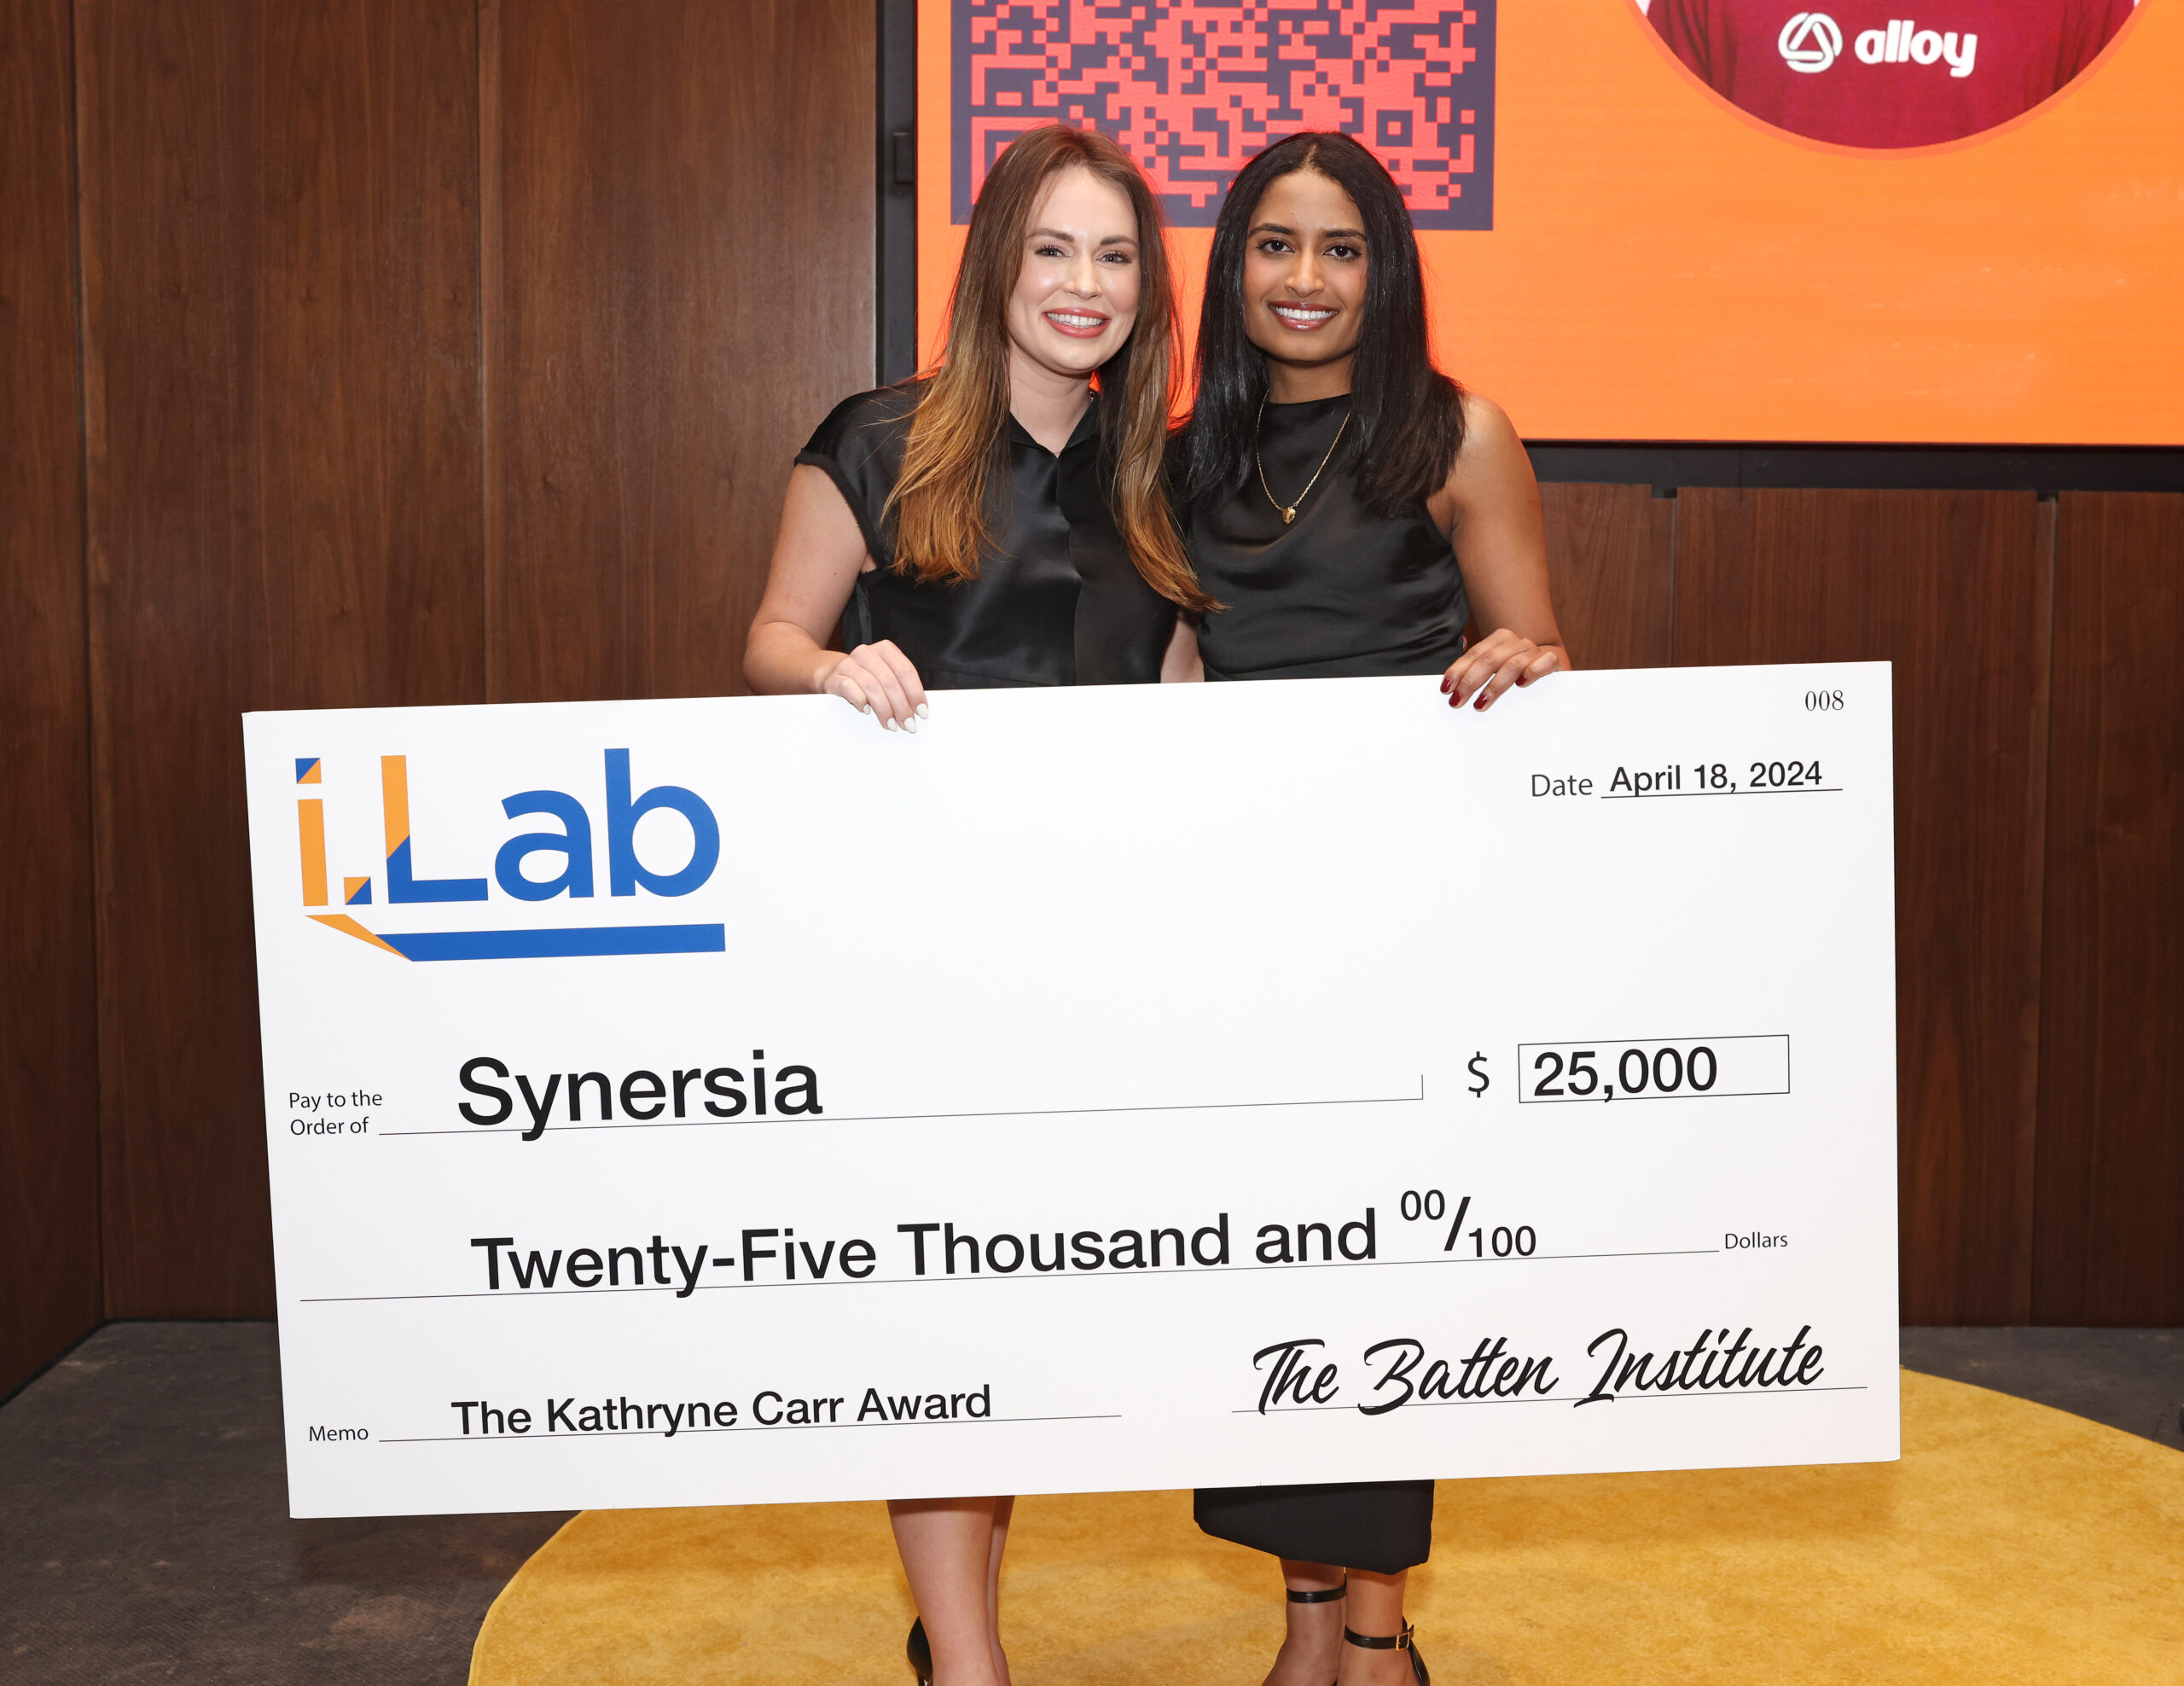 A photo of two women holding an enlarged check.